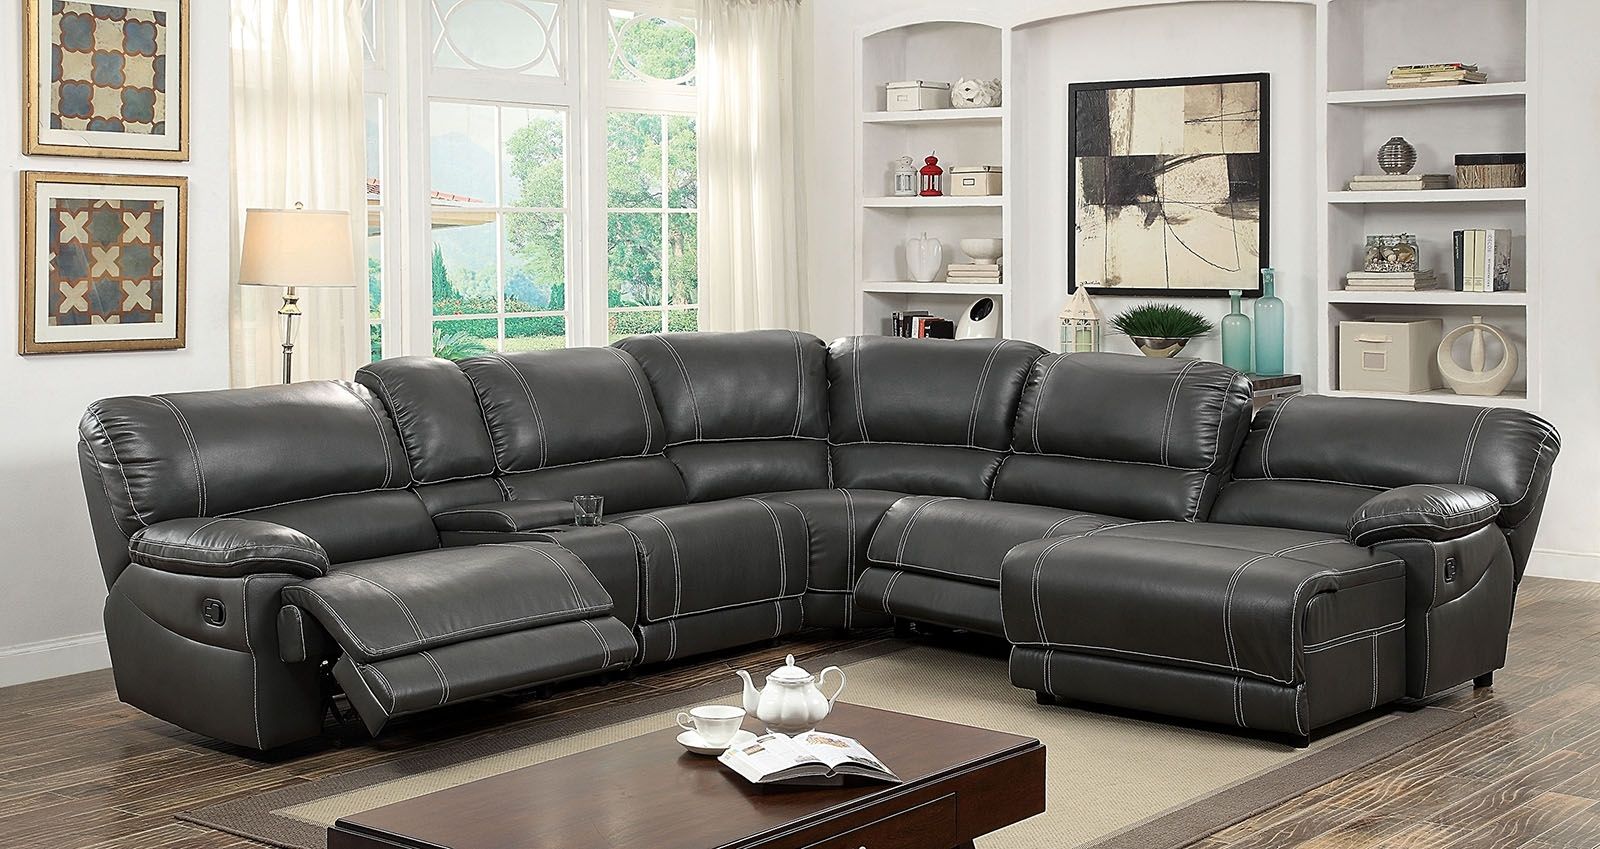 Famous Chaise Sectional Sofas Pertaining To Furniture Of America 6131gy Gray Reclining Chaise Console (View 11 of 15)